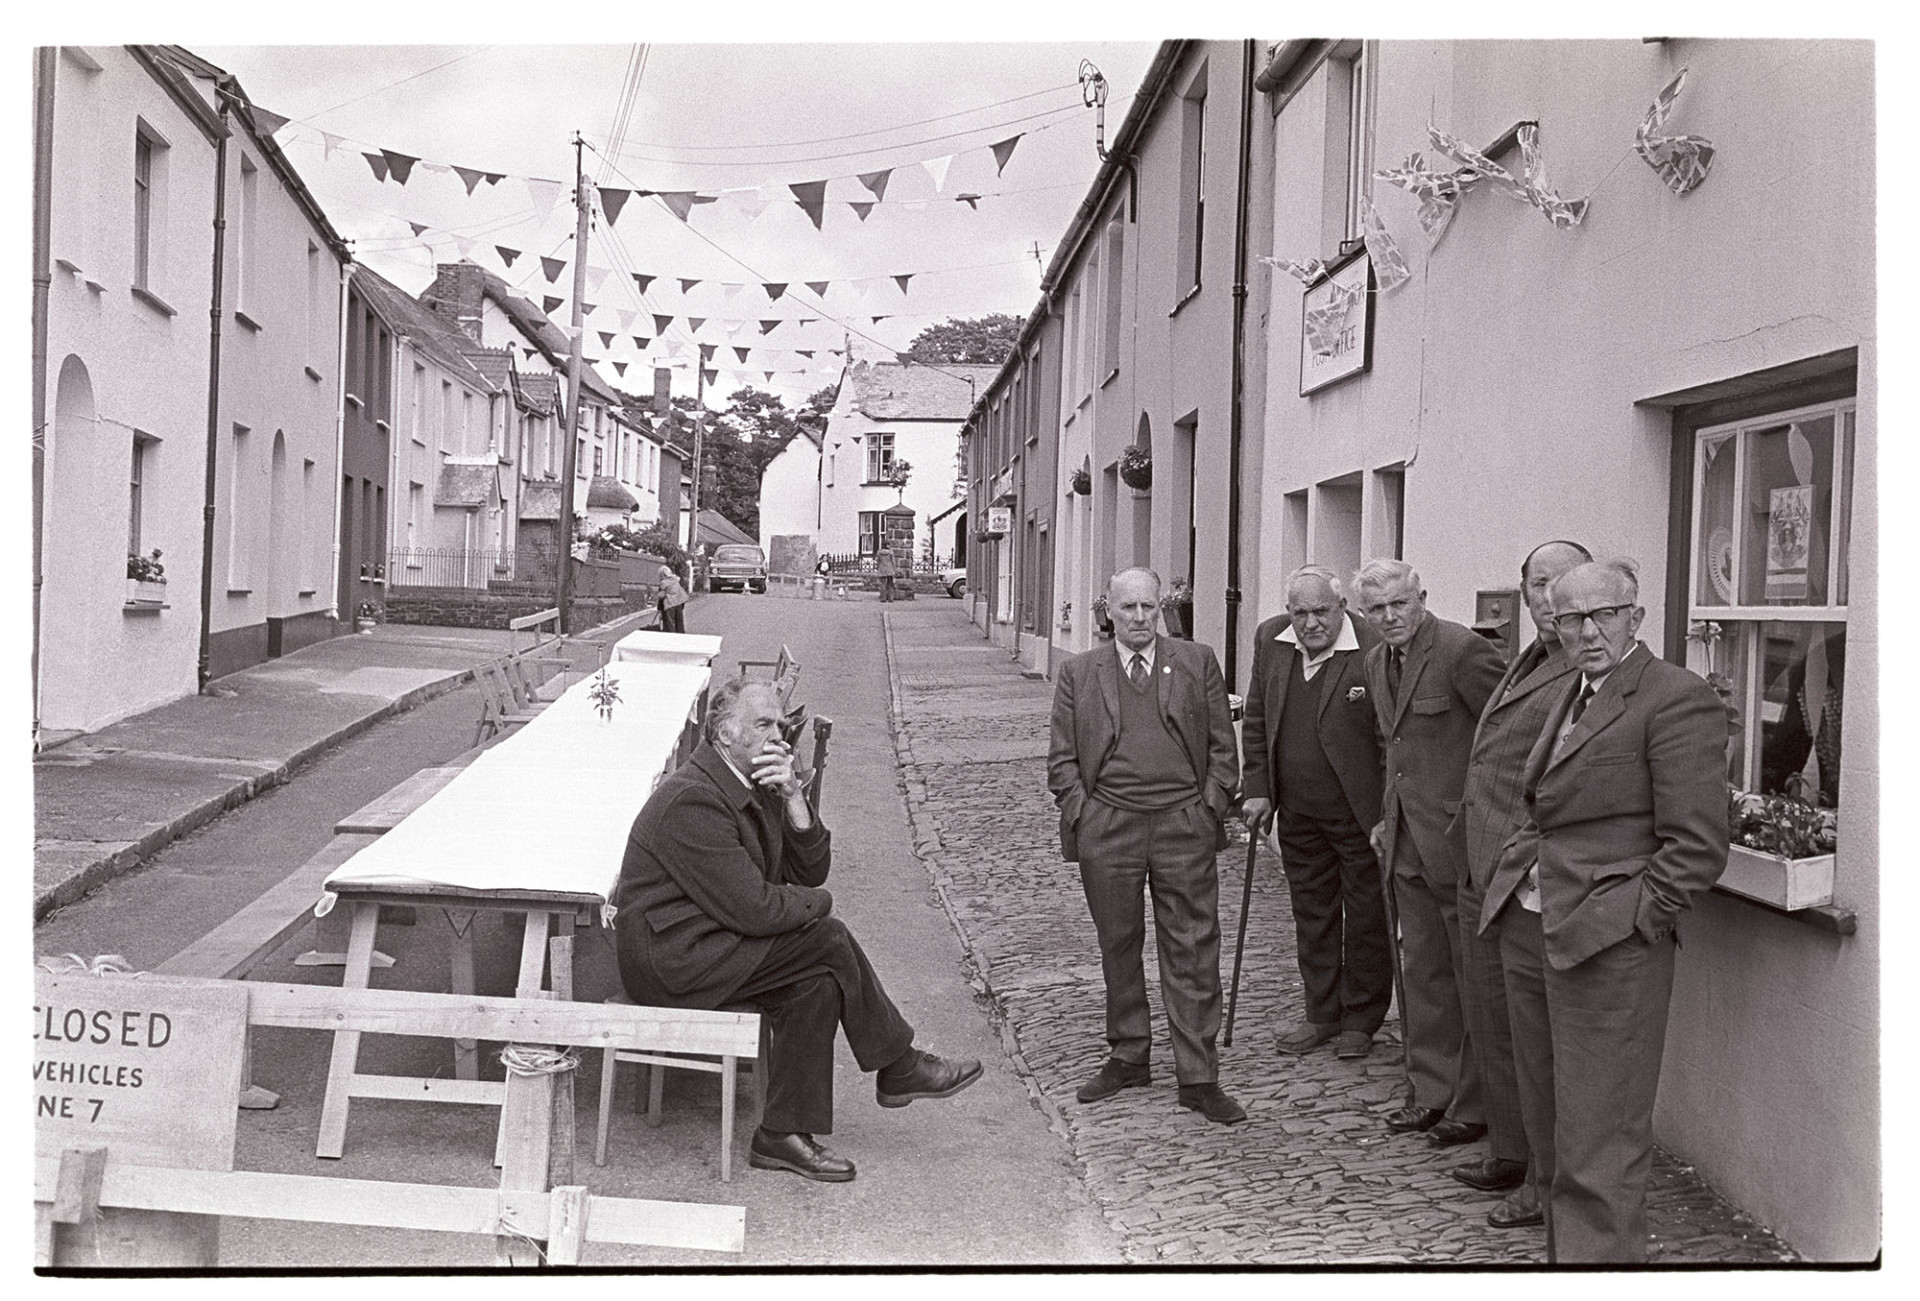 Men waiting for start of Jubilee tea in village street.<br />
[Men waiting in a street decorated with bunting for the Silver Jubilee of Queen Elizabeth II at High Bickington. From left to right the men are Bill Norman (seated), Bill Pidler, Tom Courtney, John Tucker, Bill Underhill and Wilf Marden. They are waiting for the tea and street party to begin. Some of the men have walking sticks.]